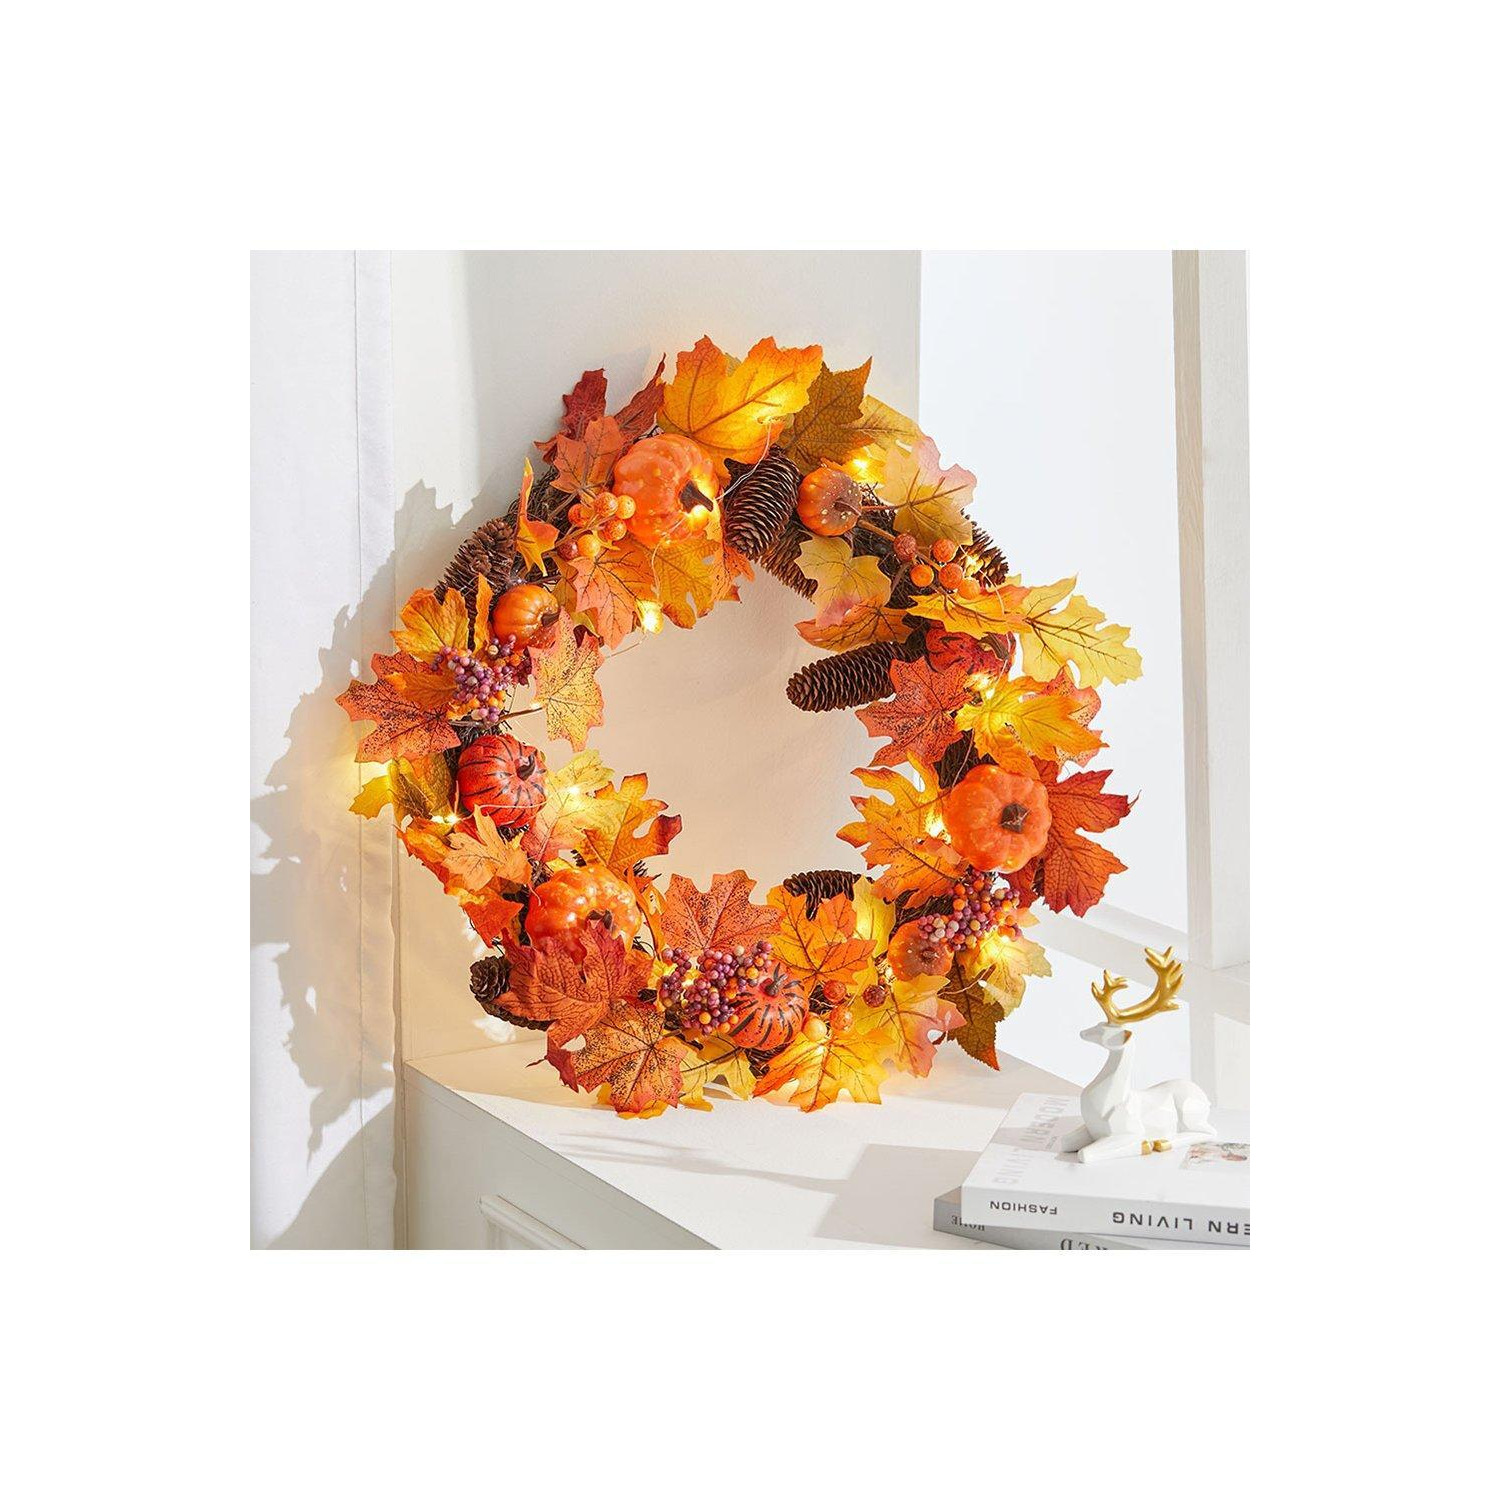 Rustic Faux Maple Leaves Halloween Autumn Decoration with Lights - image 1